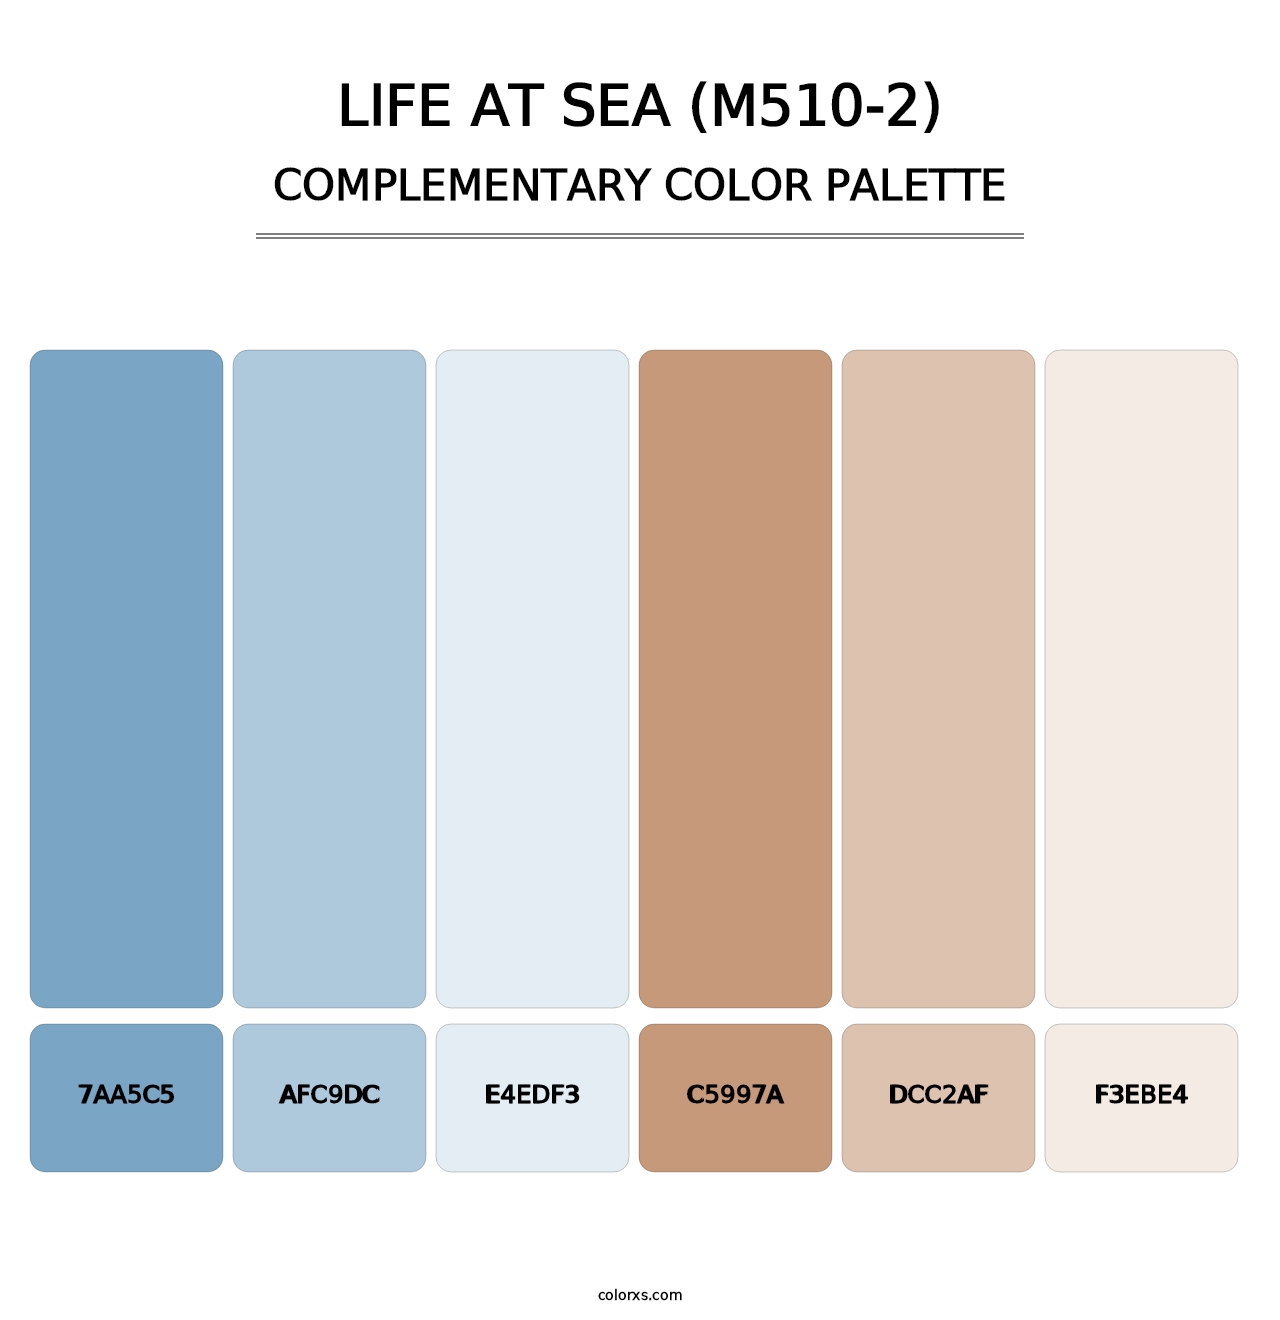 Life At Sea (M510-2) - Complementary Color Palette